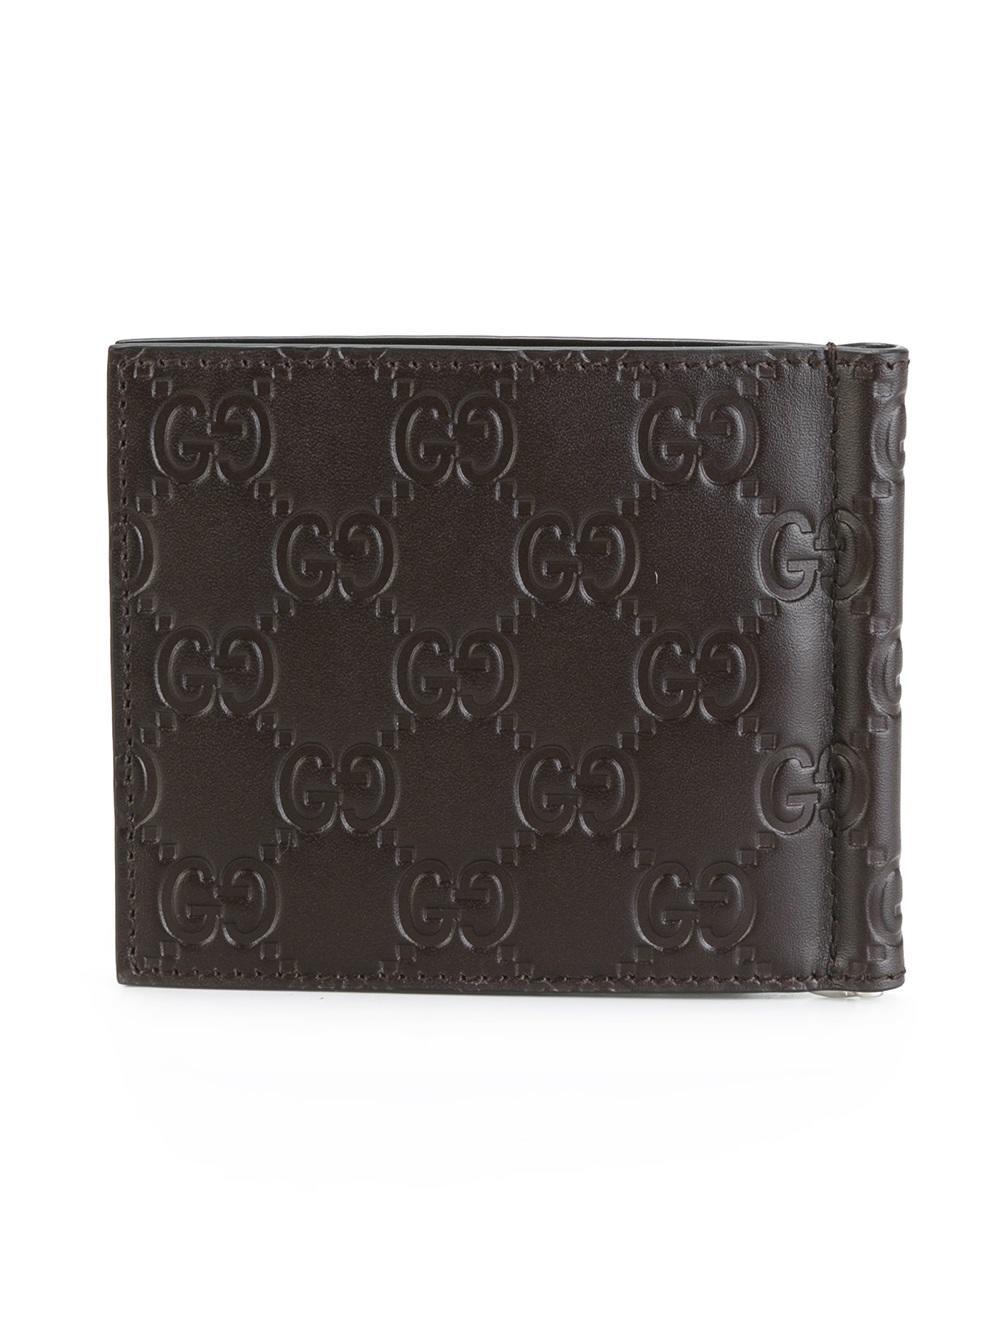 Lyst - Gucci Signature Money Clip Wallet in Brown for Men